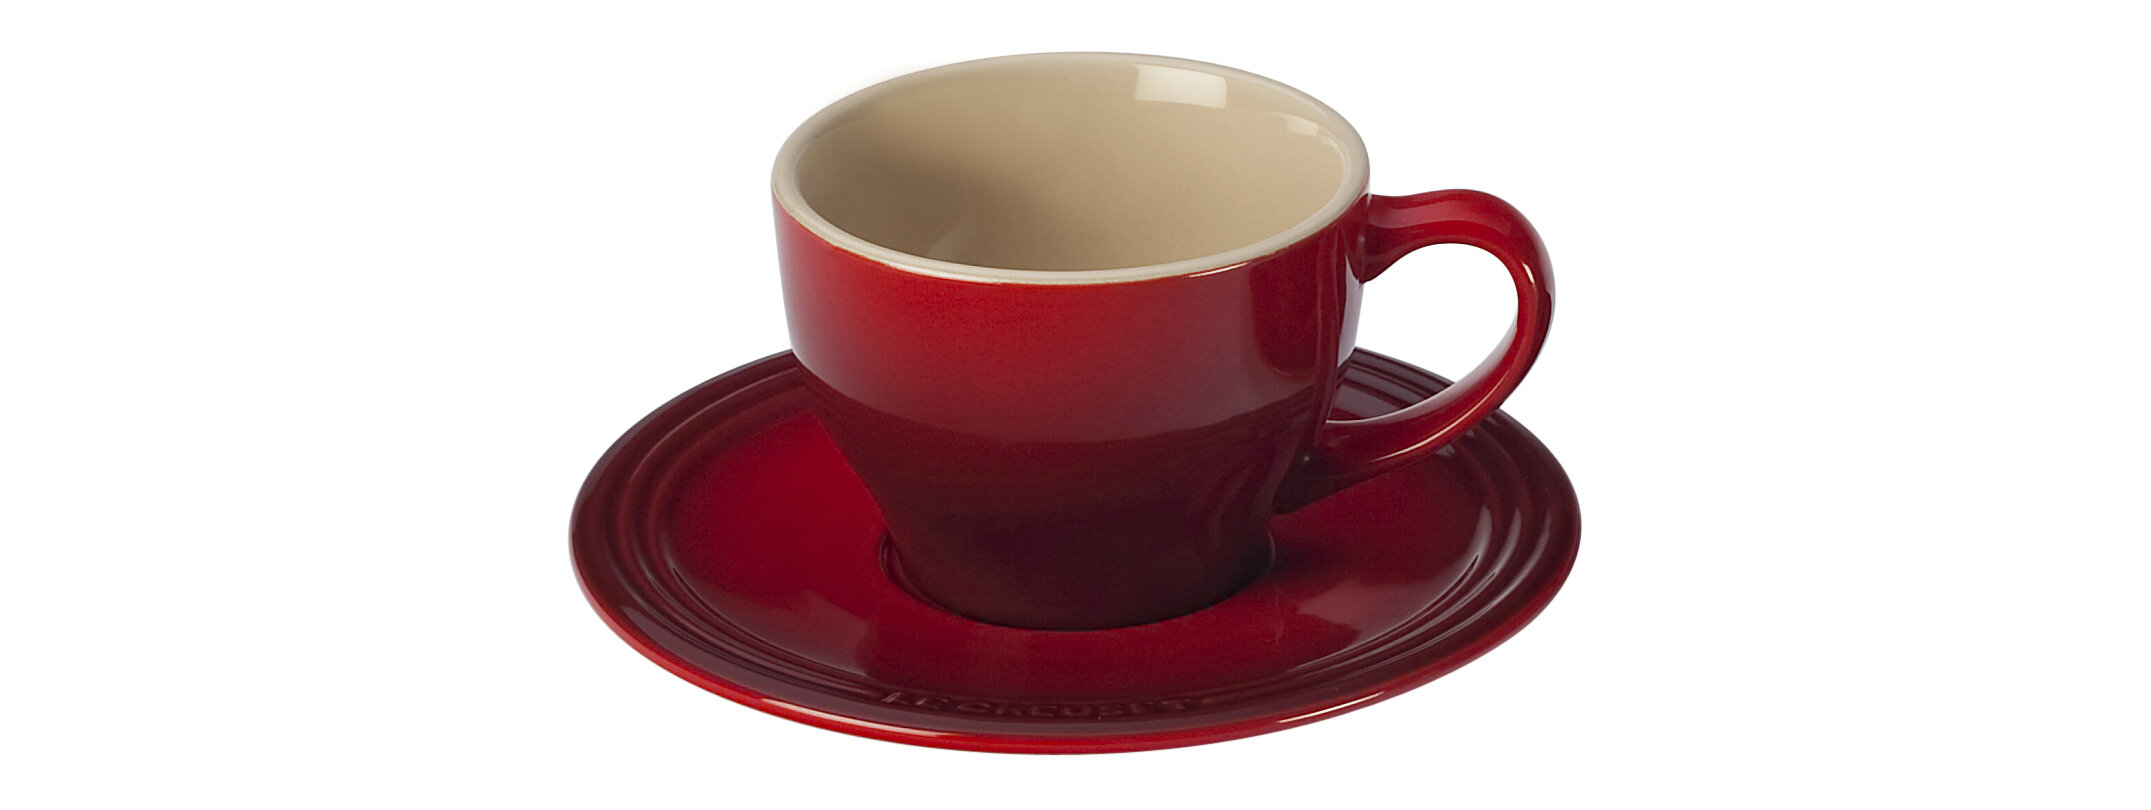 Le Creuset Cerise Stoneware Cappuccino Cups and Saucers